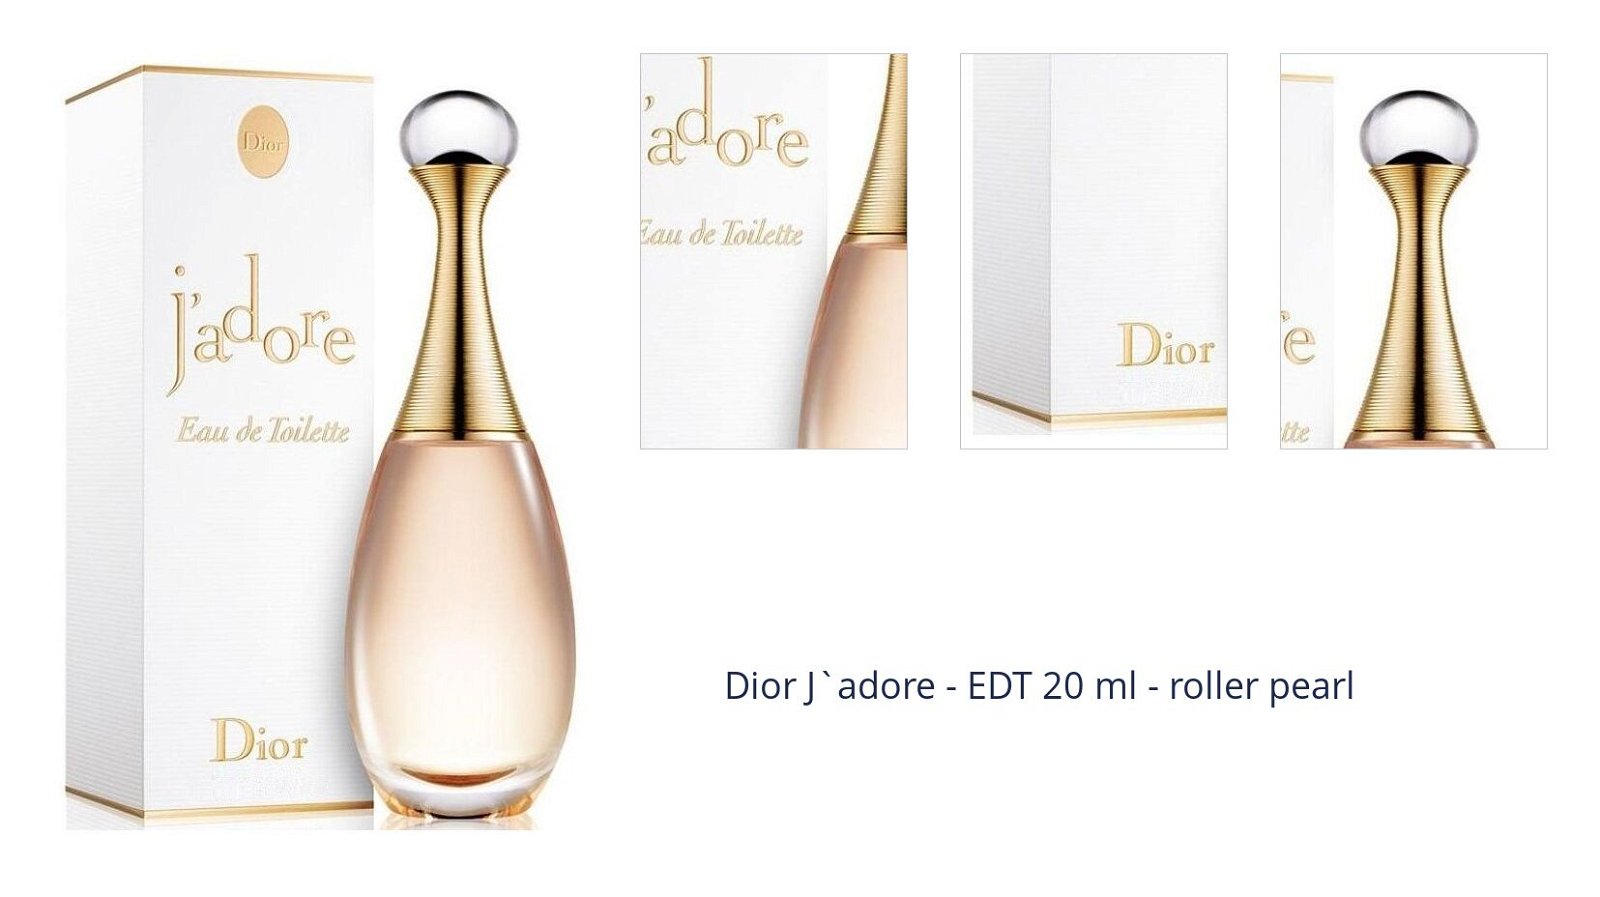 Dior J`adore - EDT 20 ml - roller pearl 1